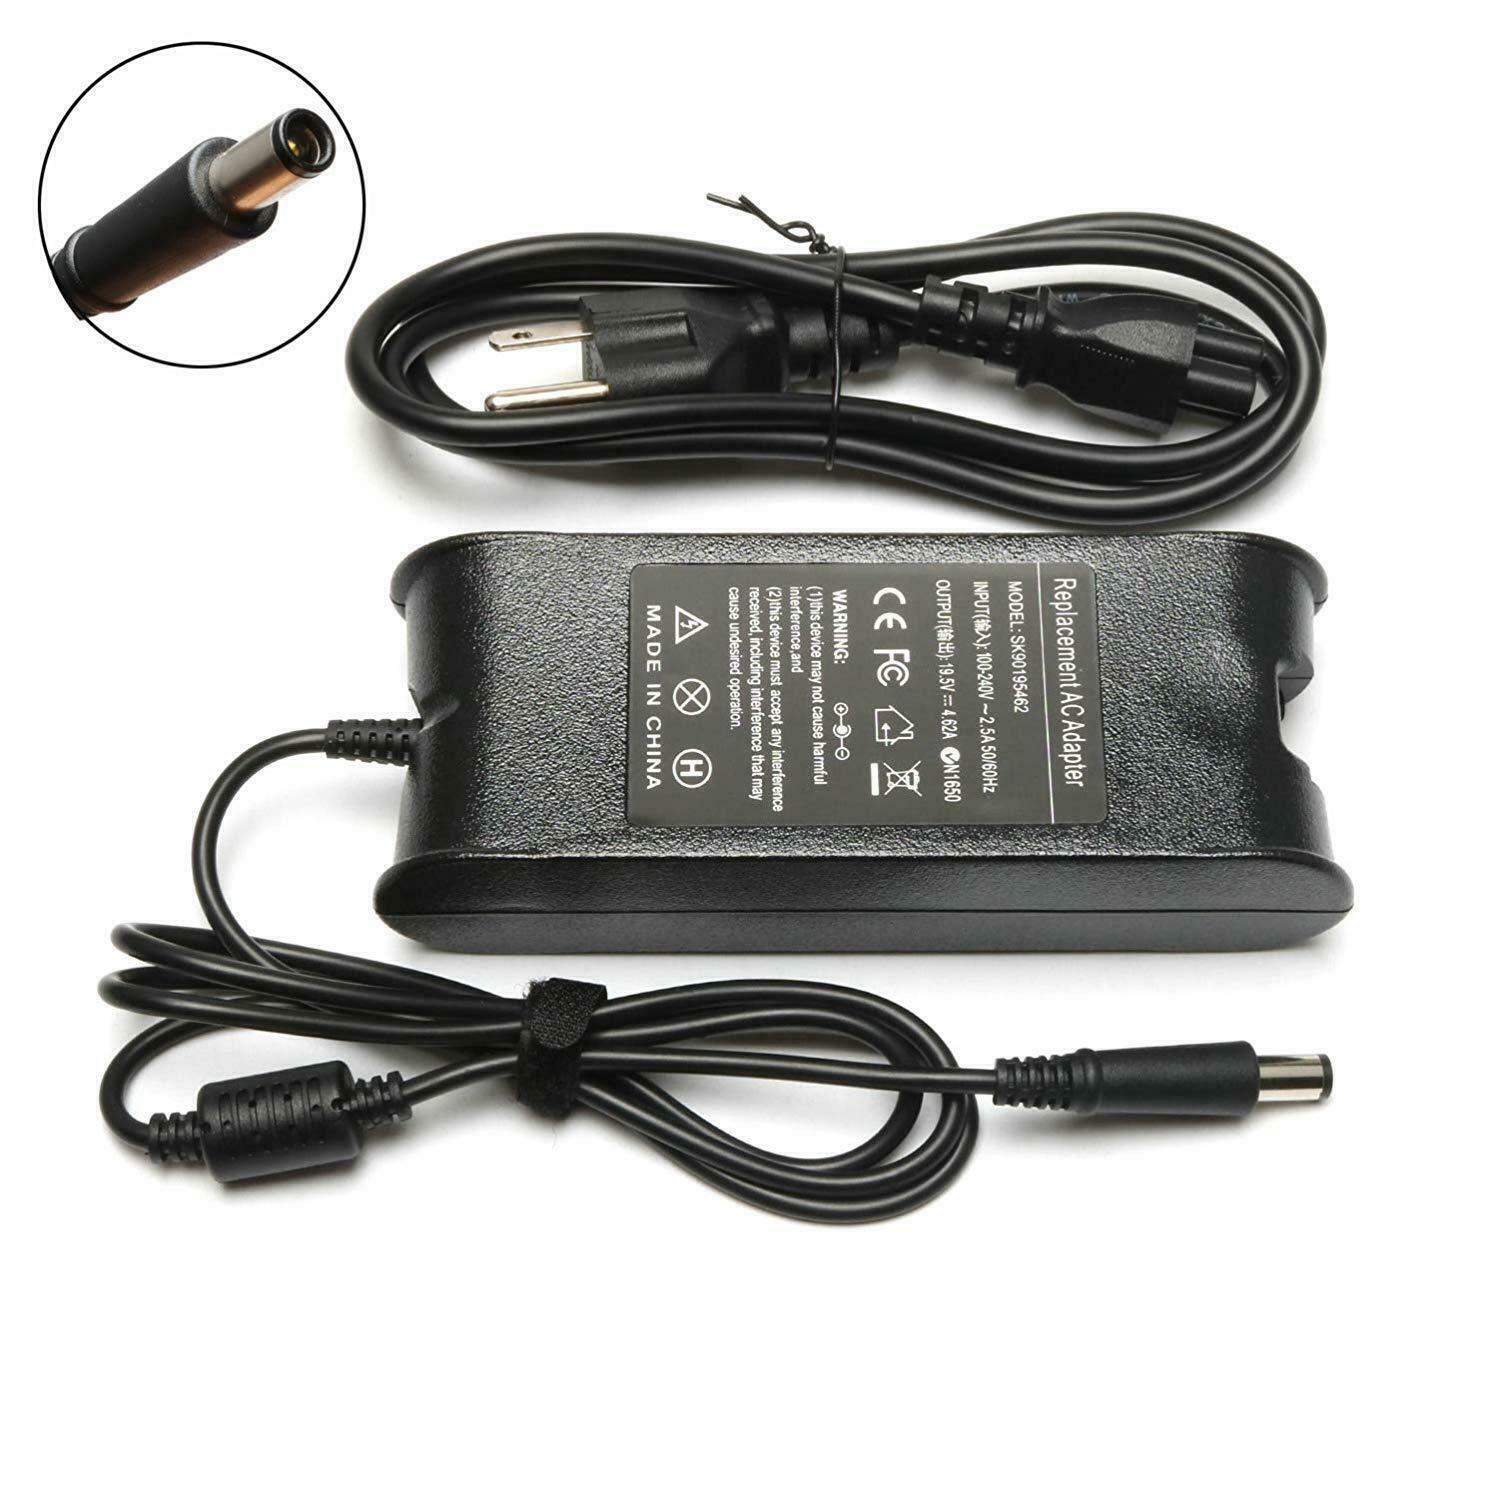 Power Adapter Charger for Dell Precision M2300 M4300 M4400 M4500 M4600 M4700 M60